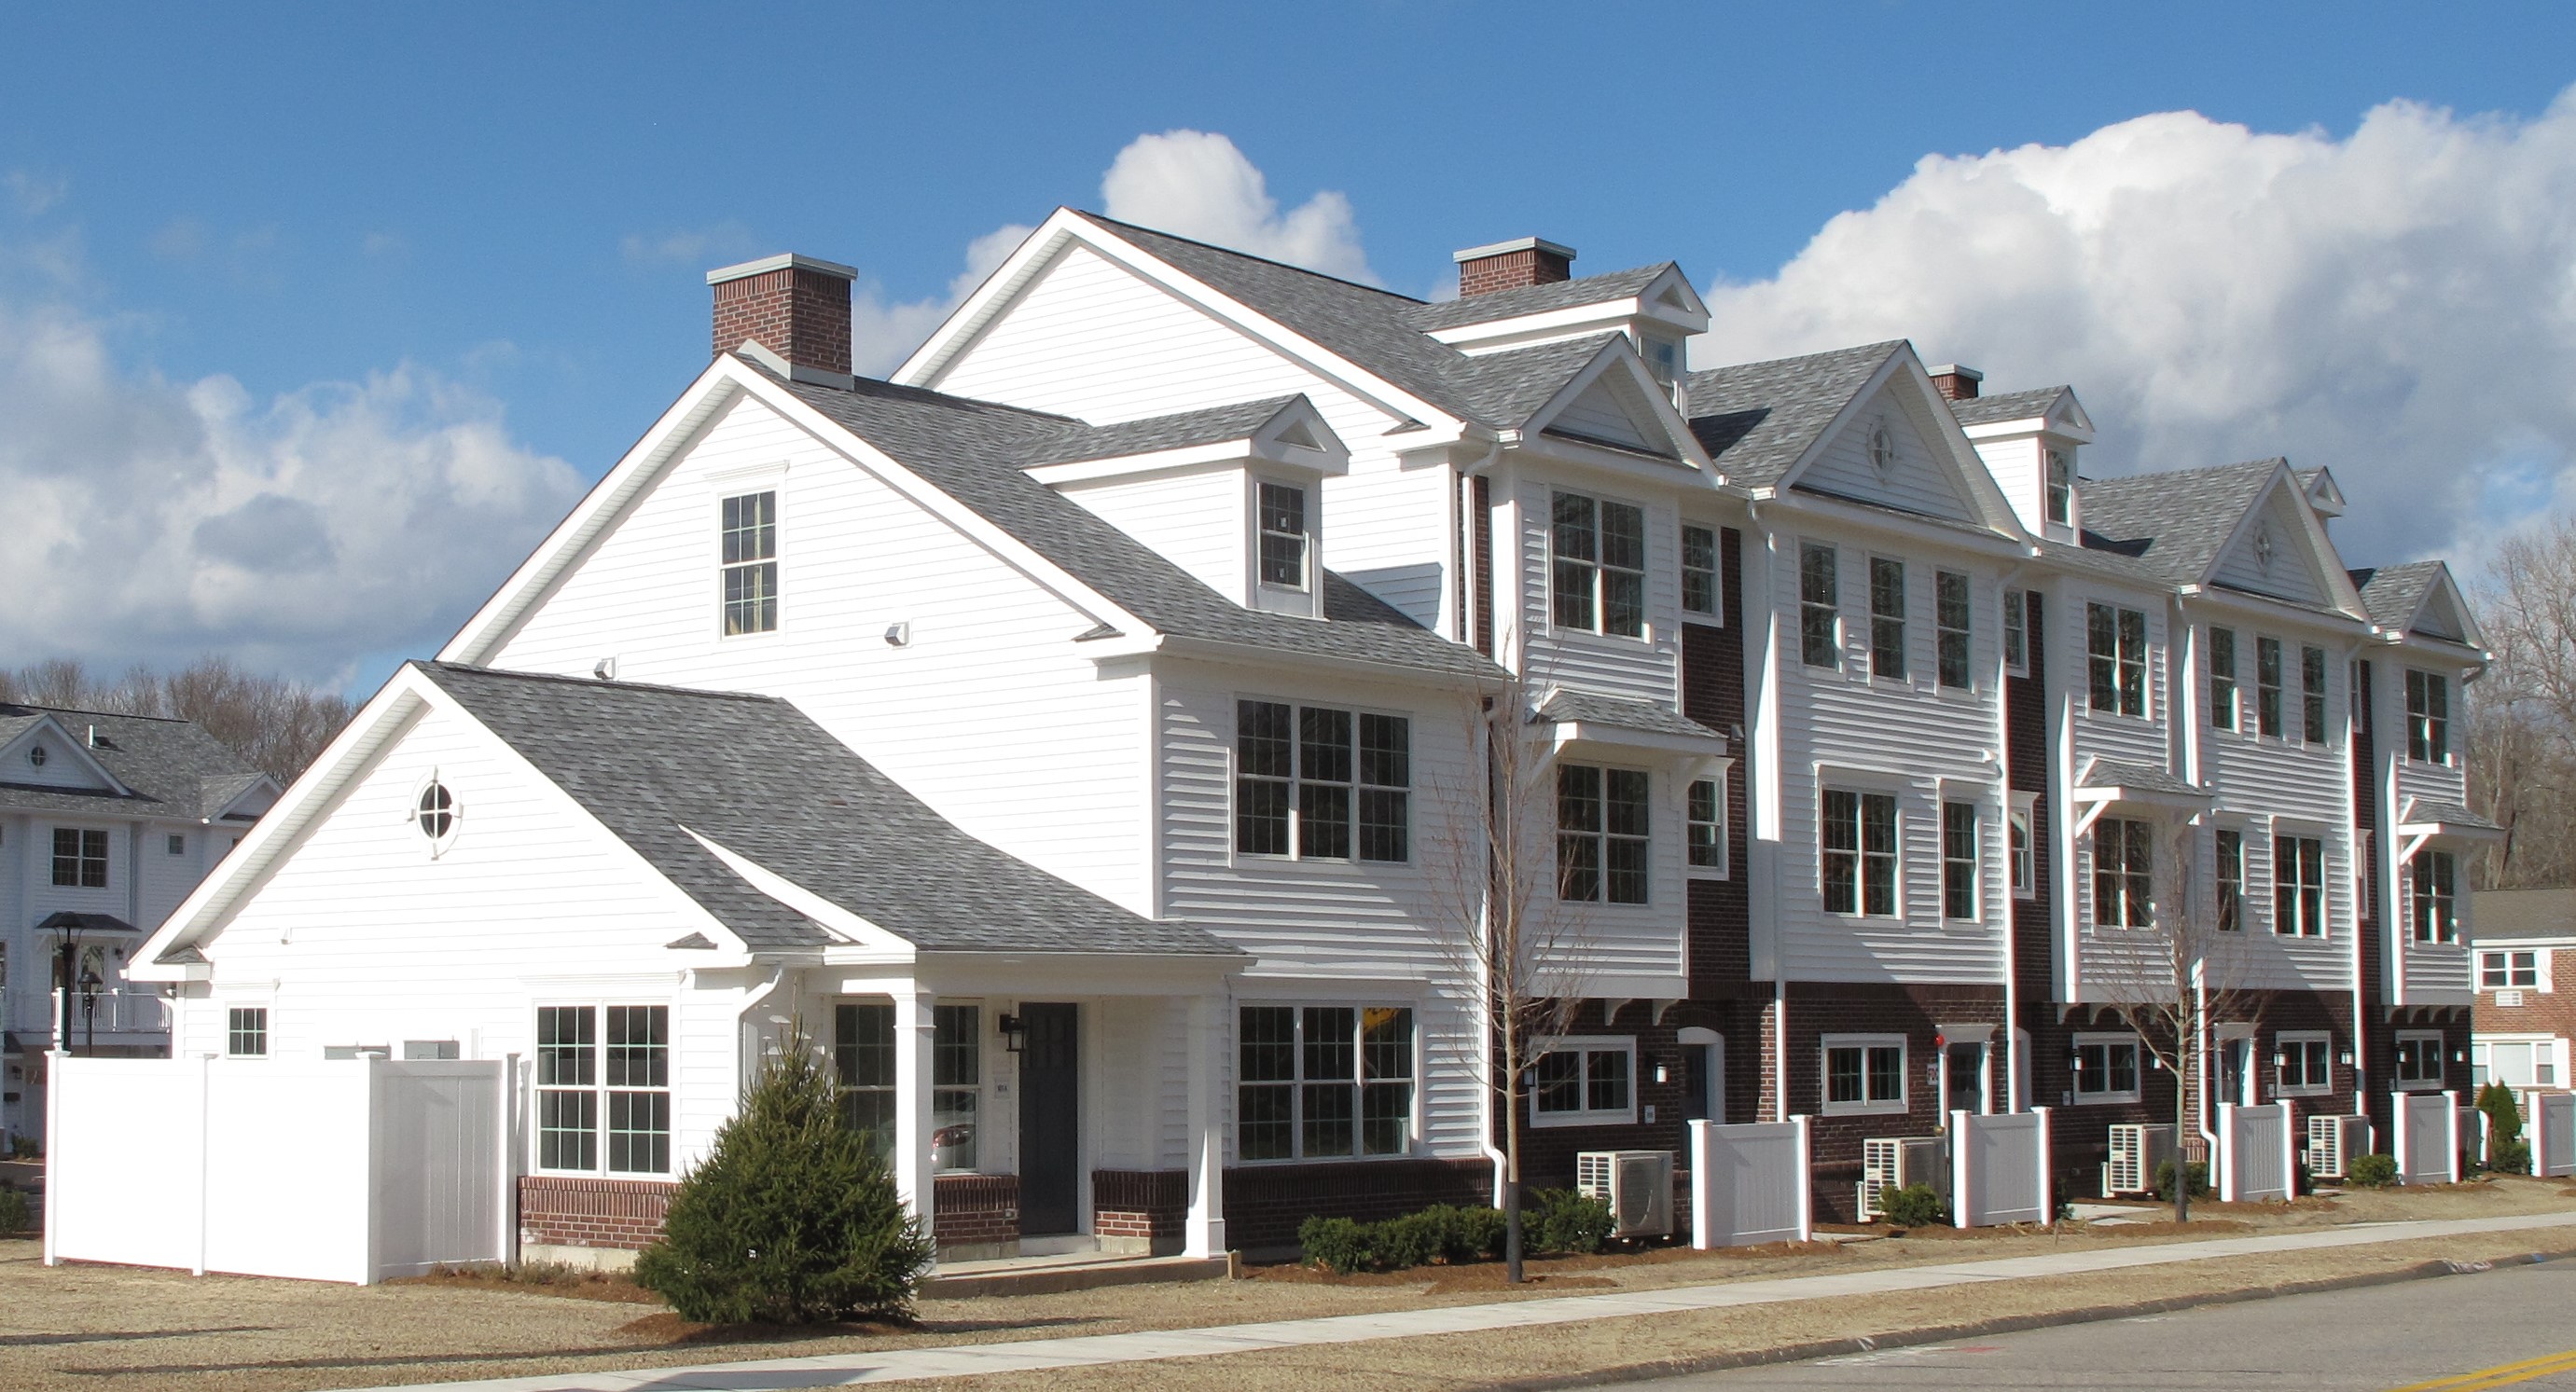 Townhomes at Colonial Village Photo 1